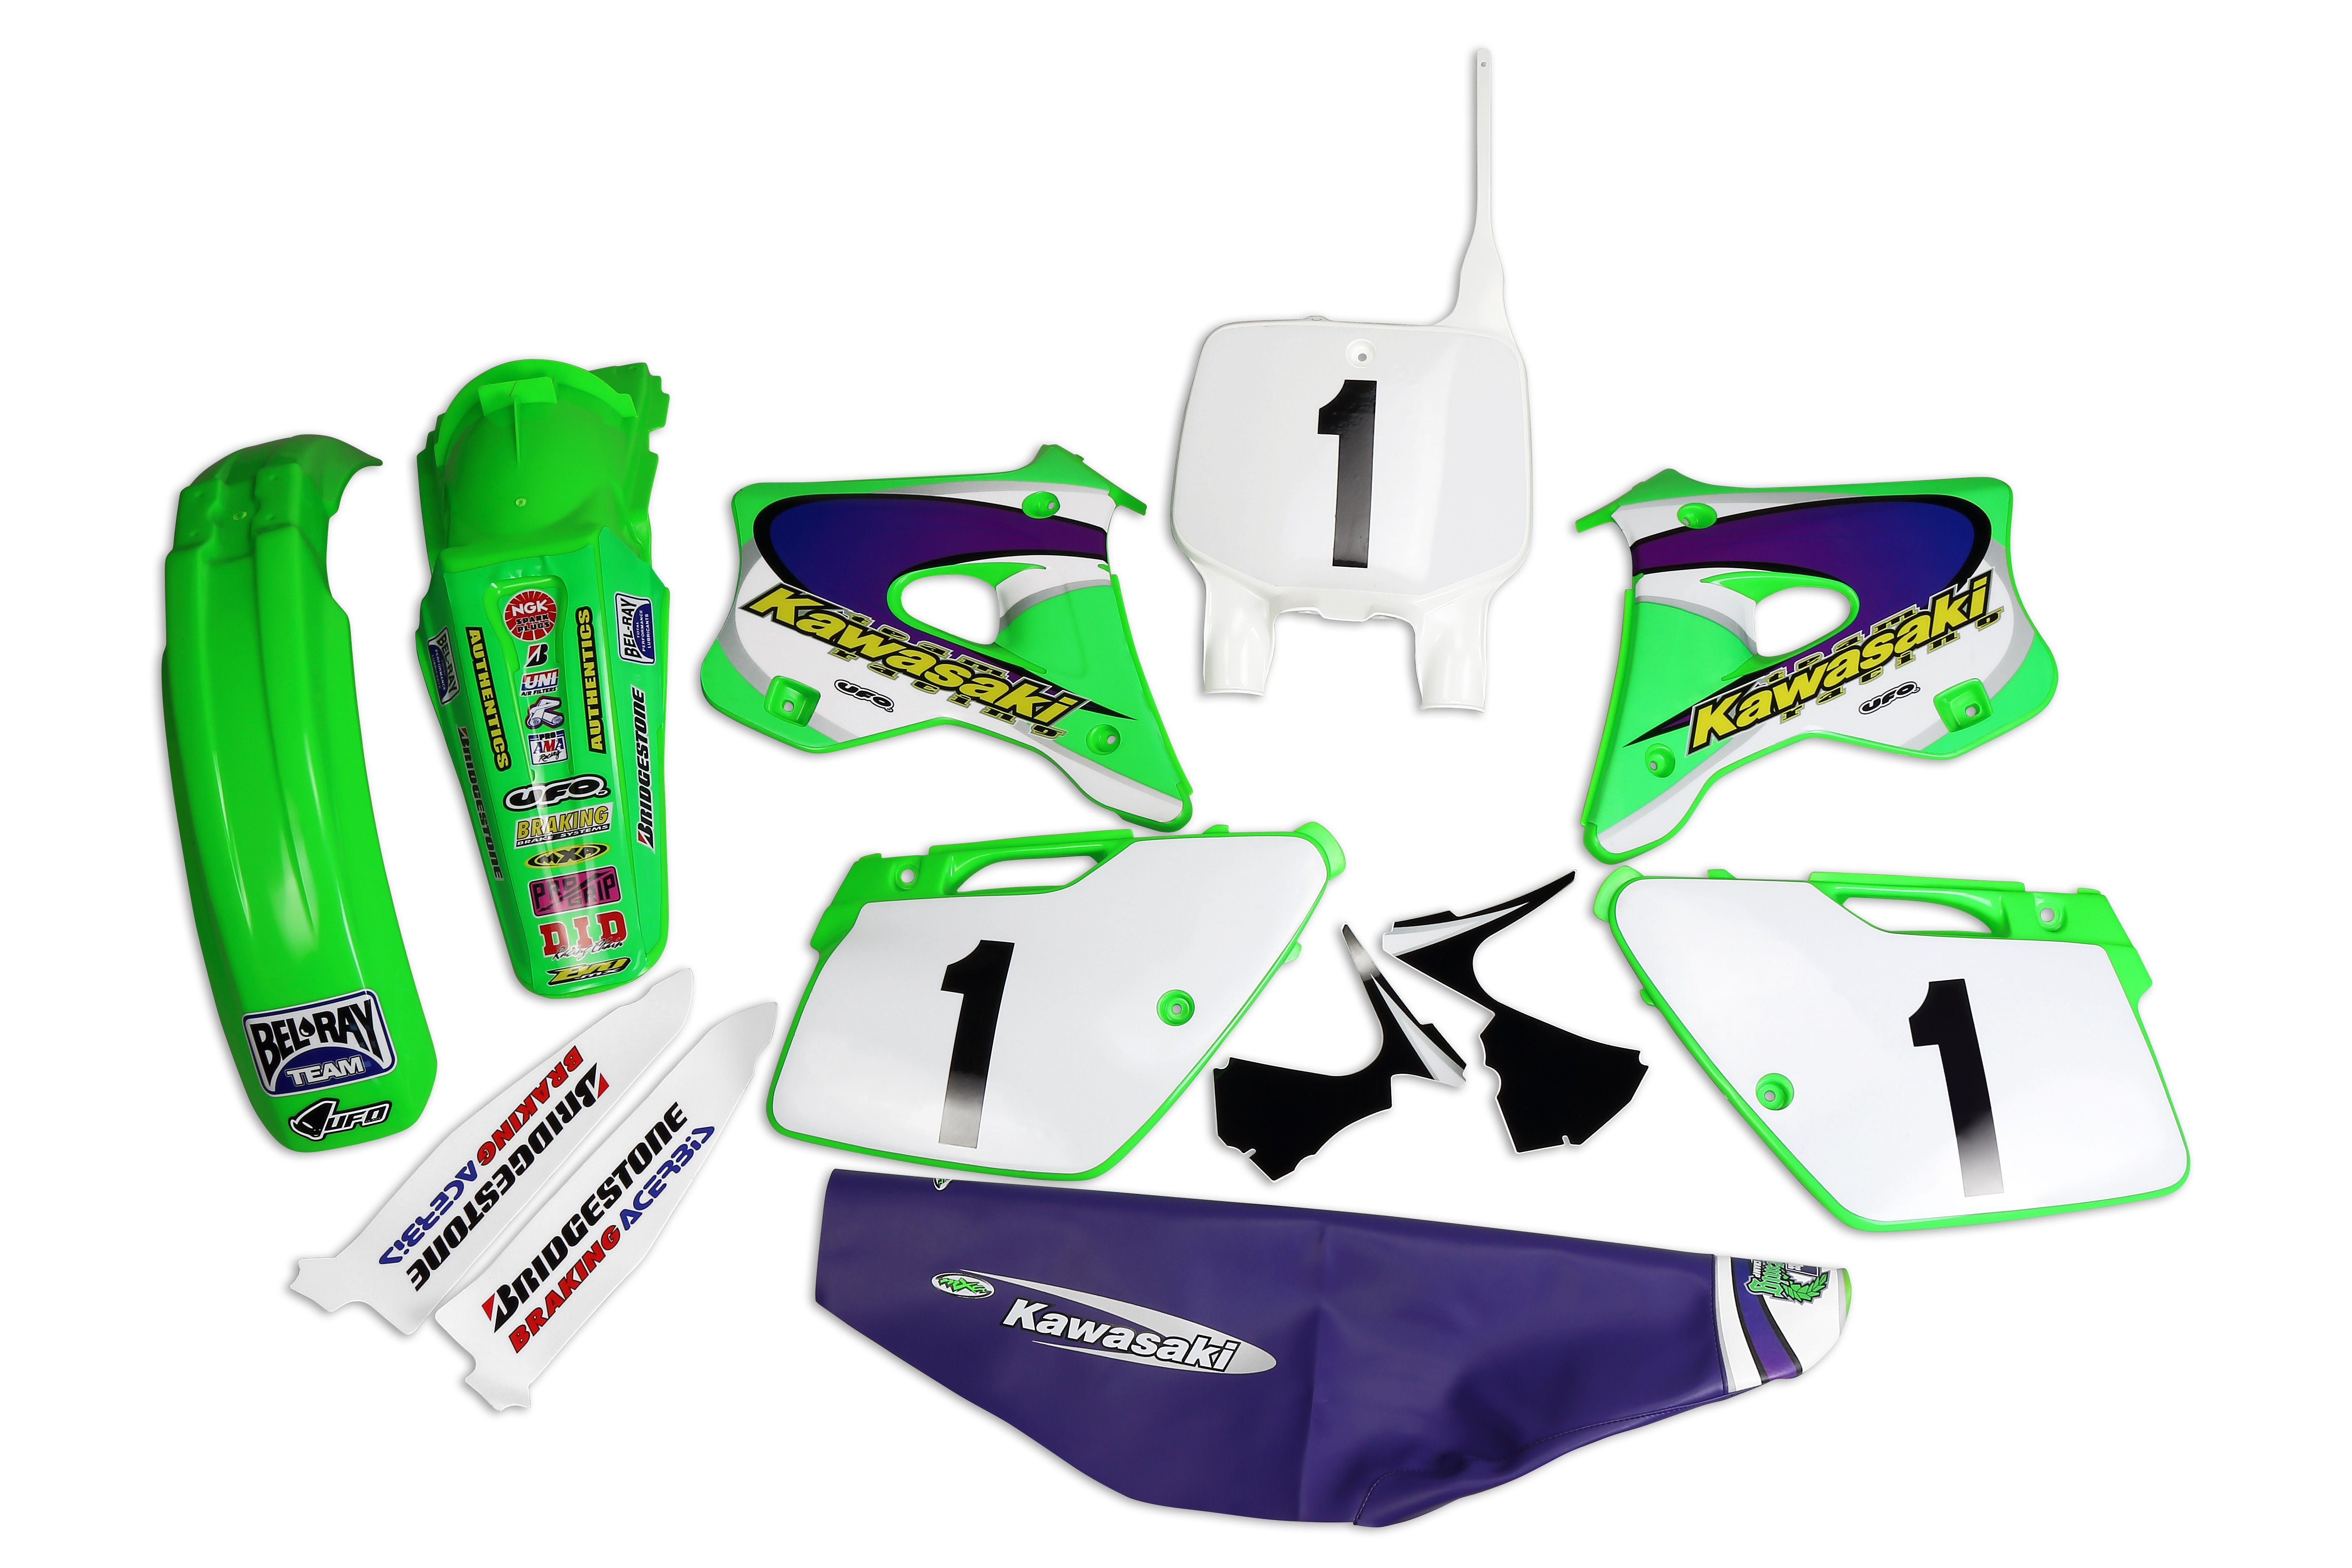 UFO KIT Kawasaki KX 125/250 1994-98 Emig Team USA, includes all Parts in the picture